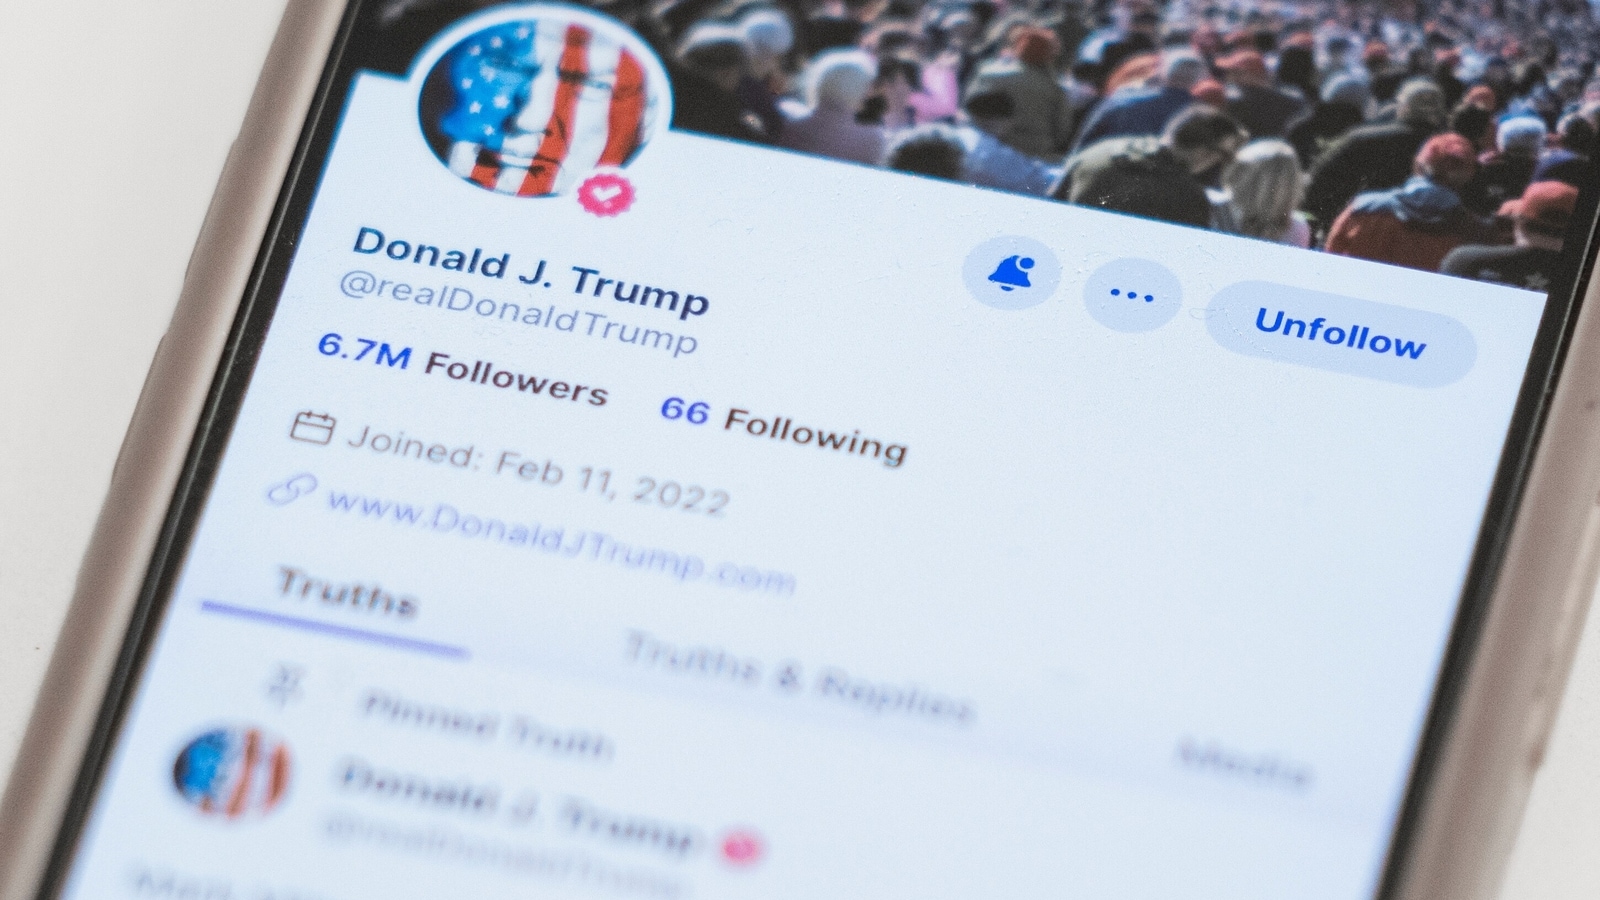 What we know about Truth Social, Donald Trump's social media platform